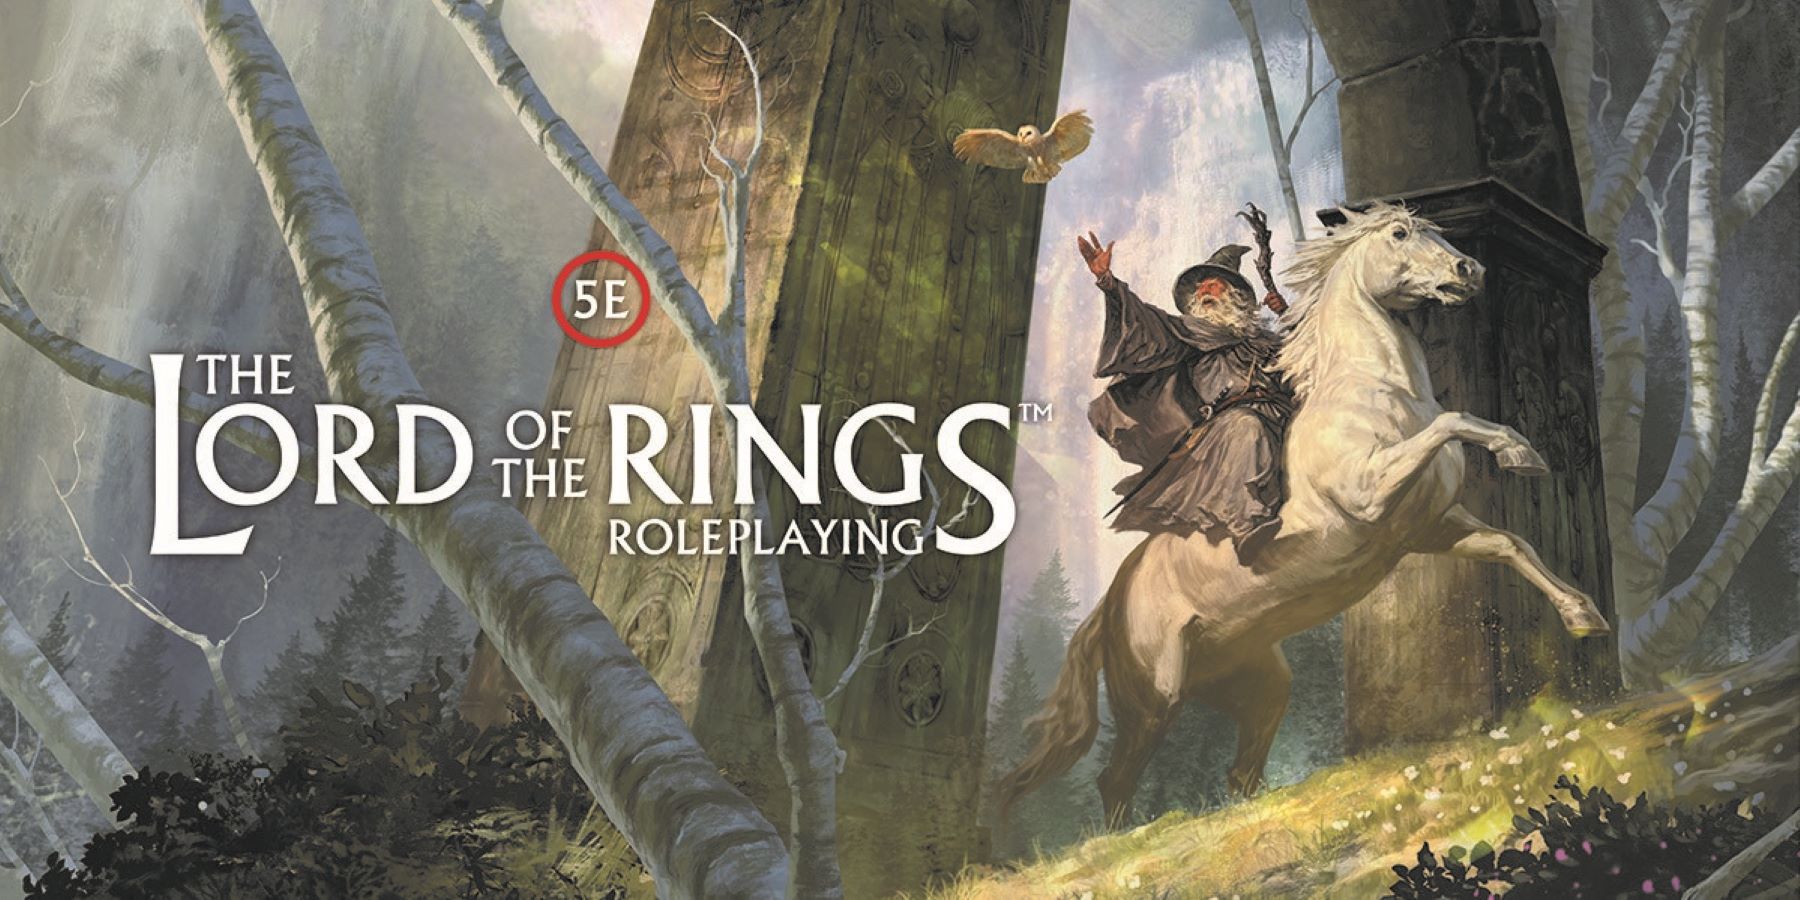 Cover art for Free League Publishing's Lord of the Rings 5e Dungeons and Dragons book